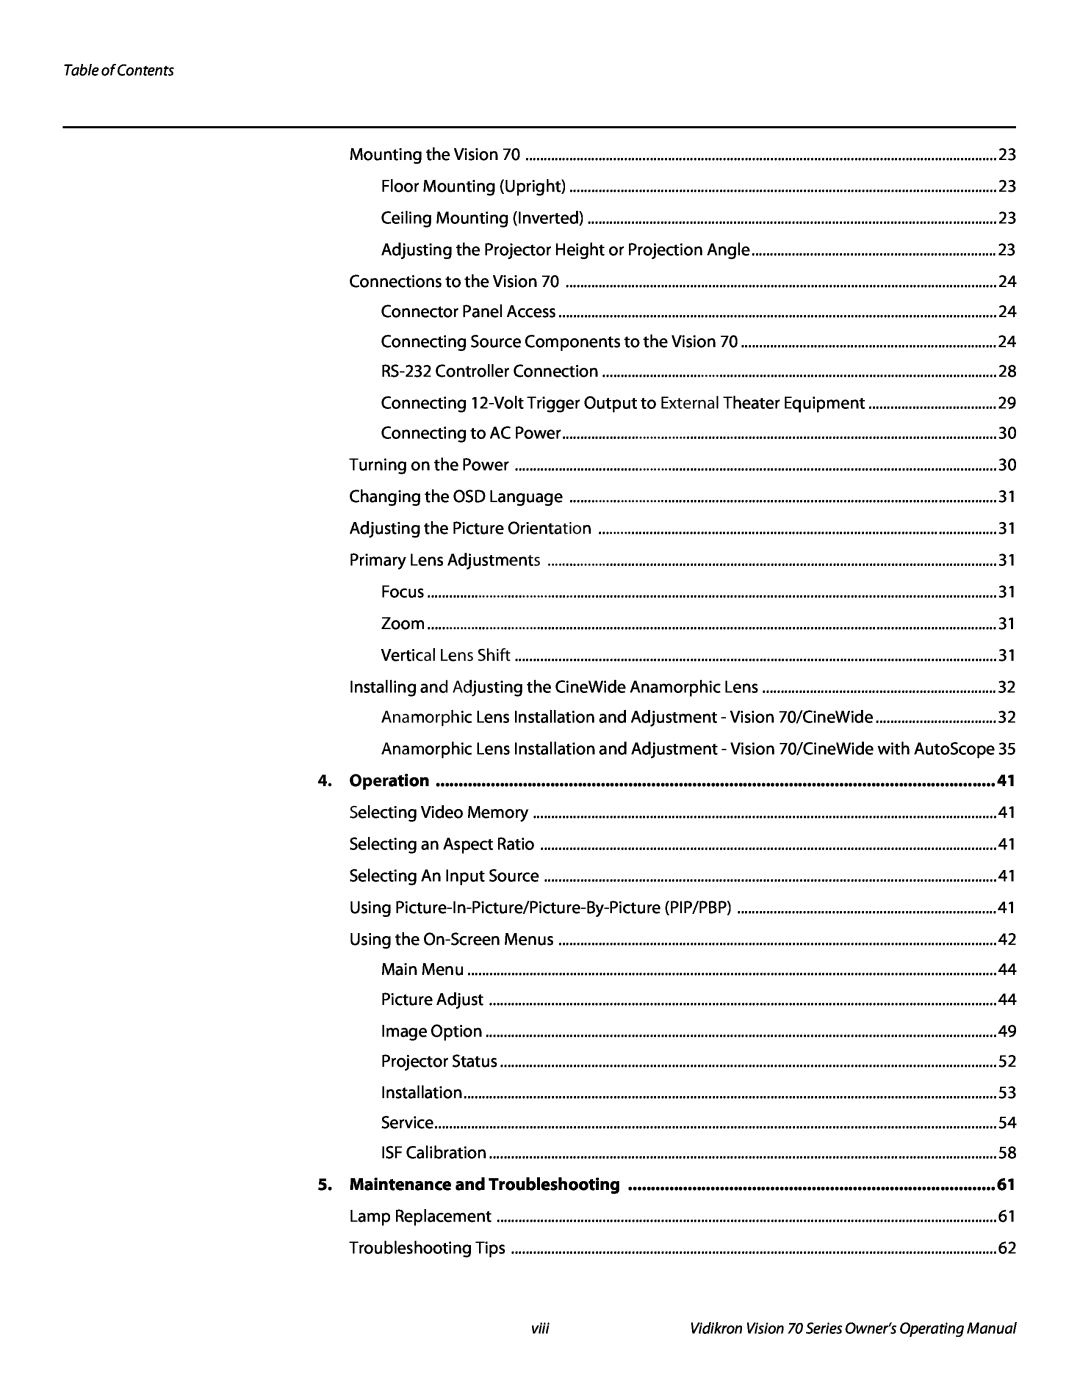 Vidikron SERIES 1080p manual Table of Contents, Operation, Maintenance and Troubleshooting, viii 